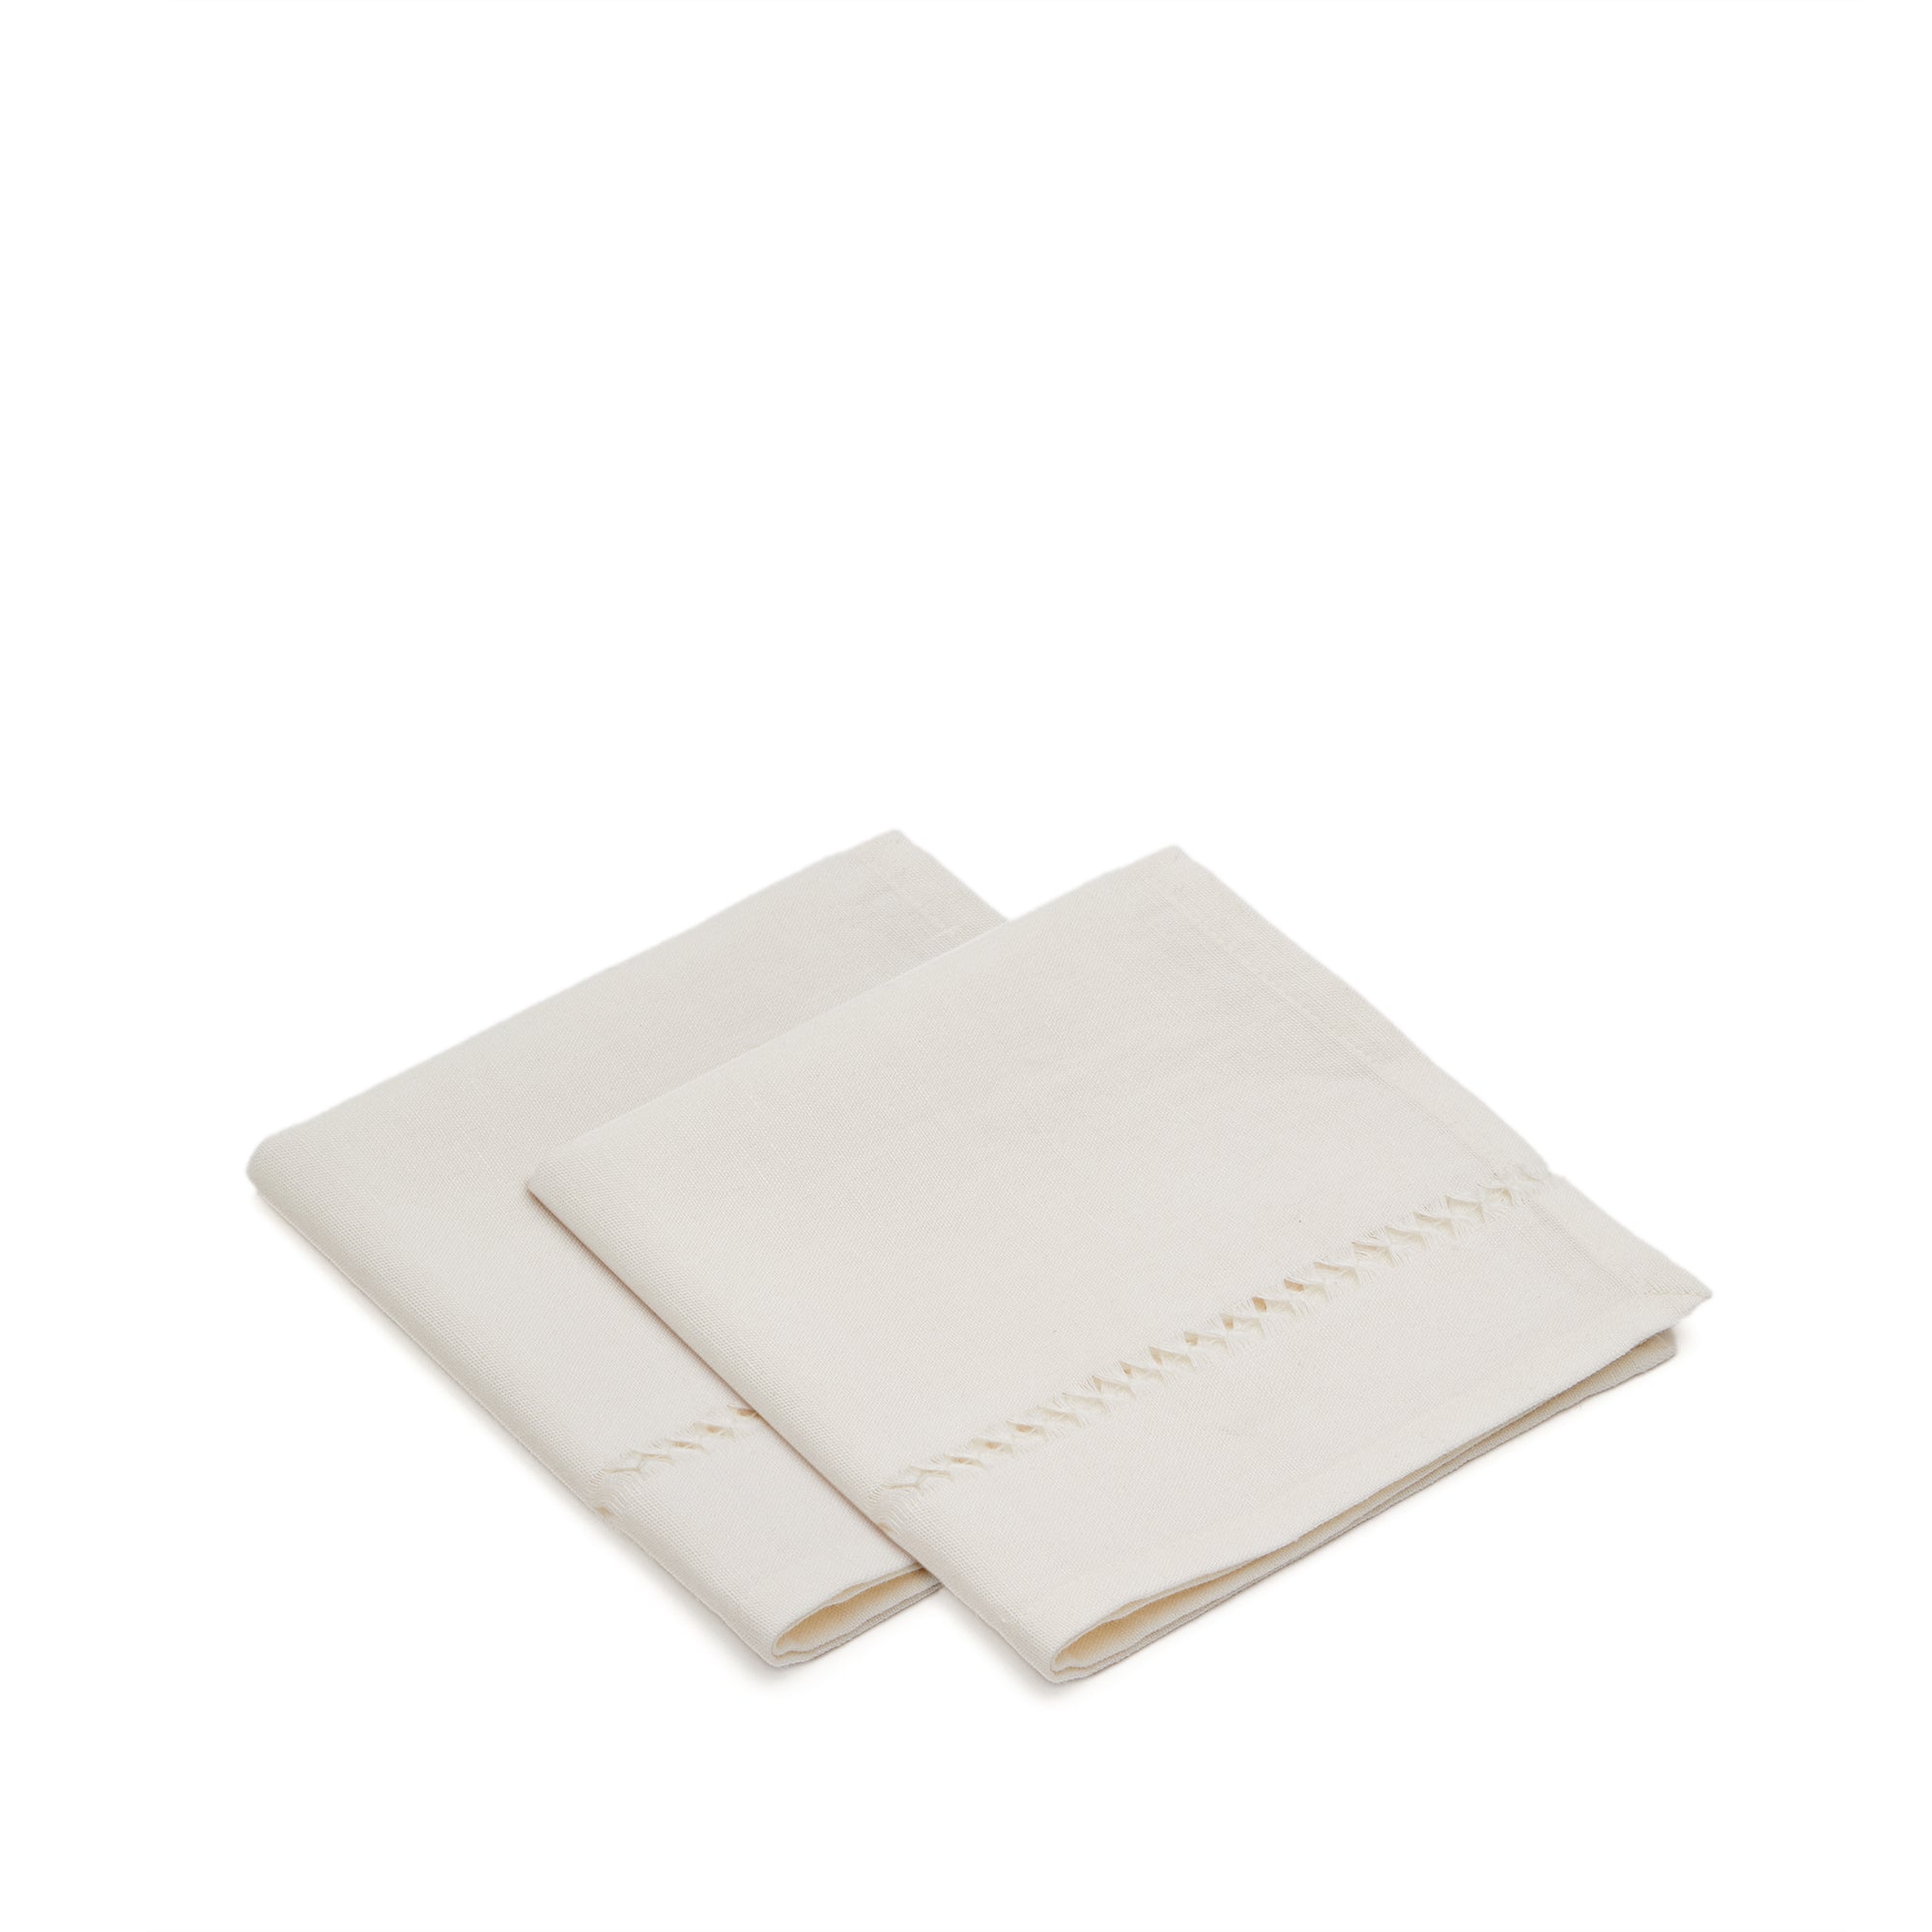 Sempa 2 white linen and cotton napkins with a cut pattern